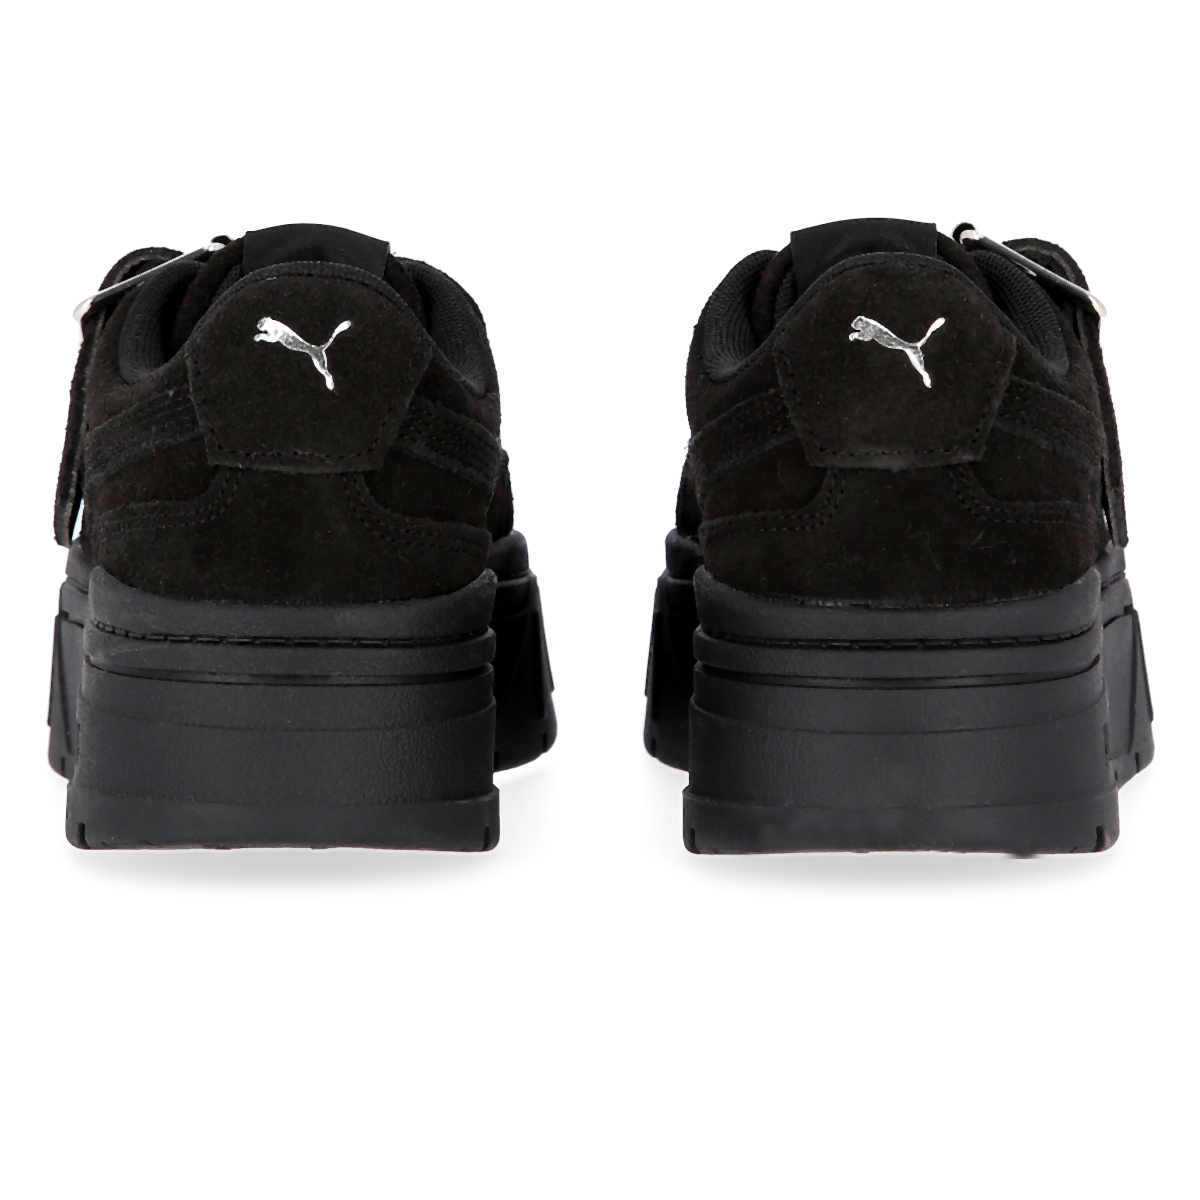 Zapatillas Puma Mayze Stack The Ragged Priest Mujer,  image number null